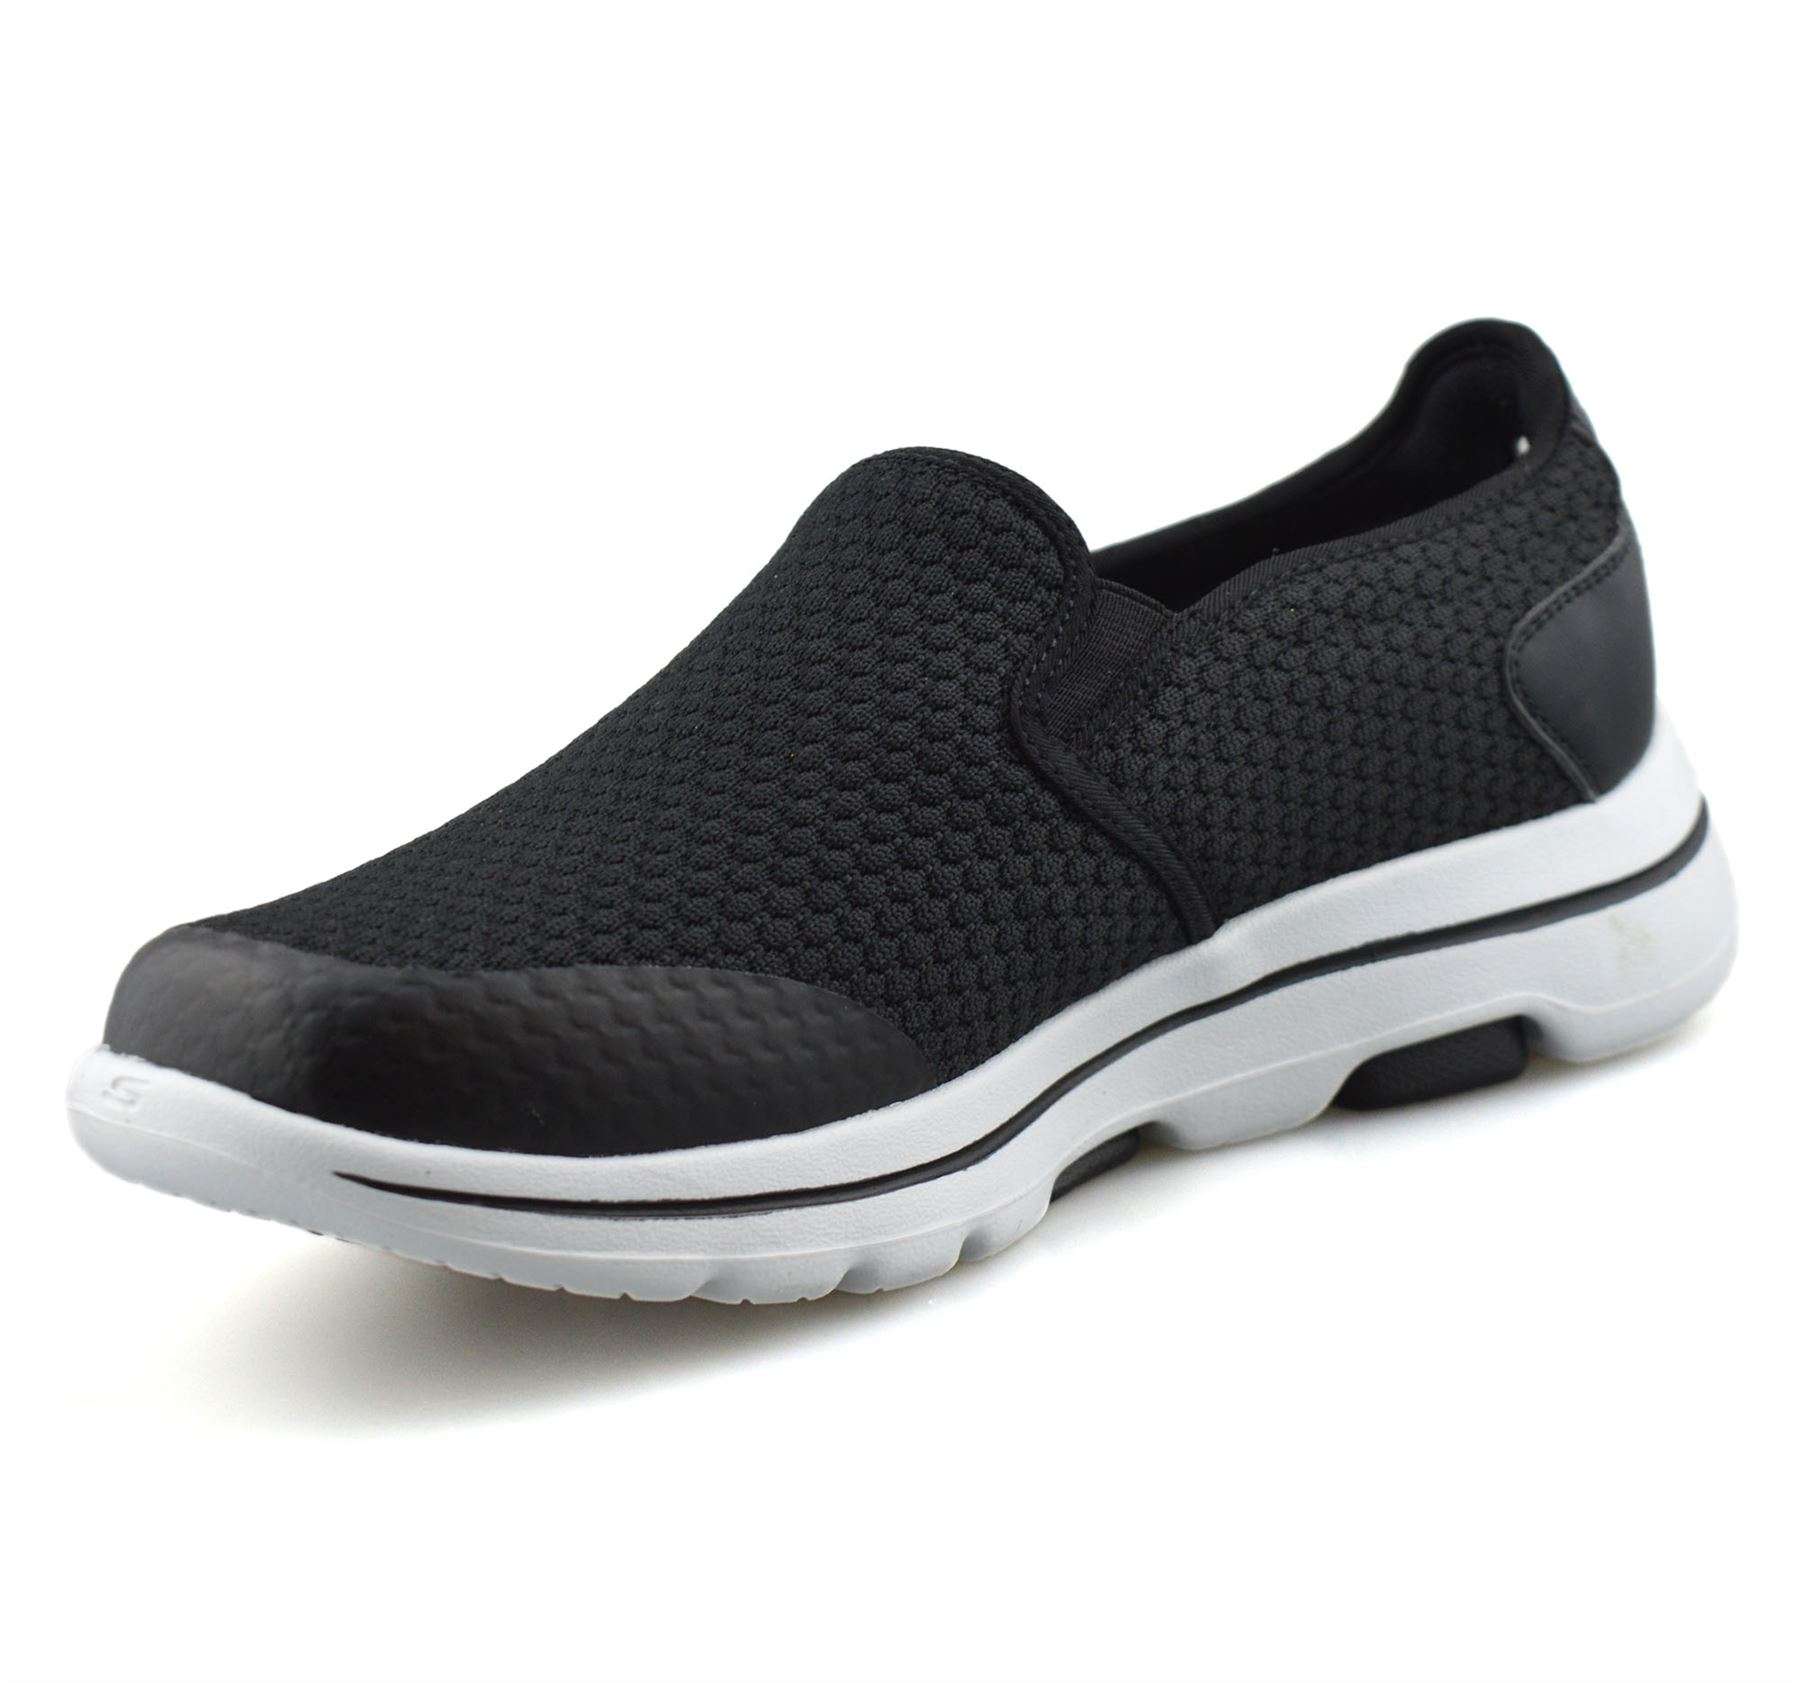 Mens Skechers GOwalk New Slip On Extra Wide Fit Walking Gym Trainers ...